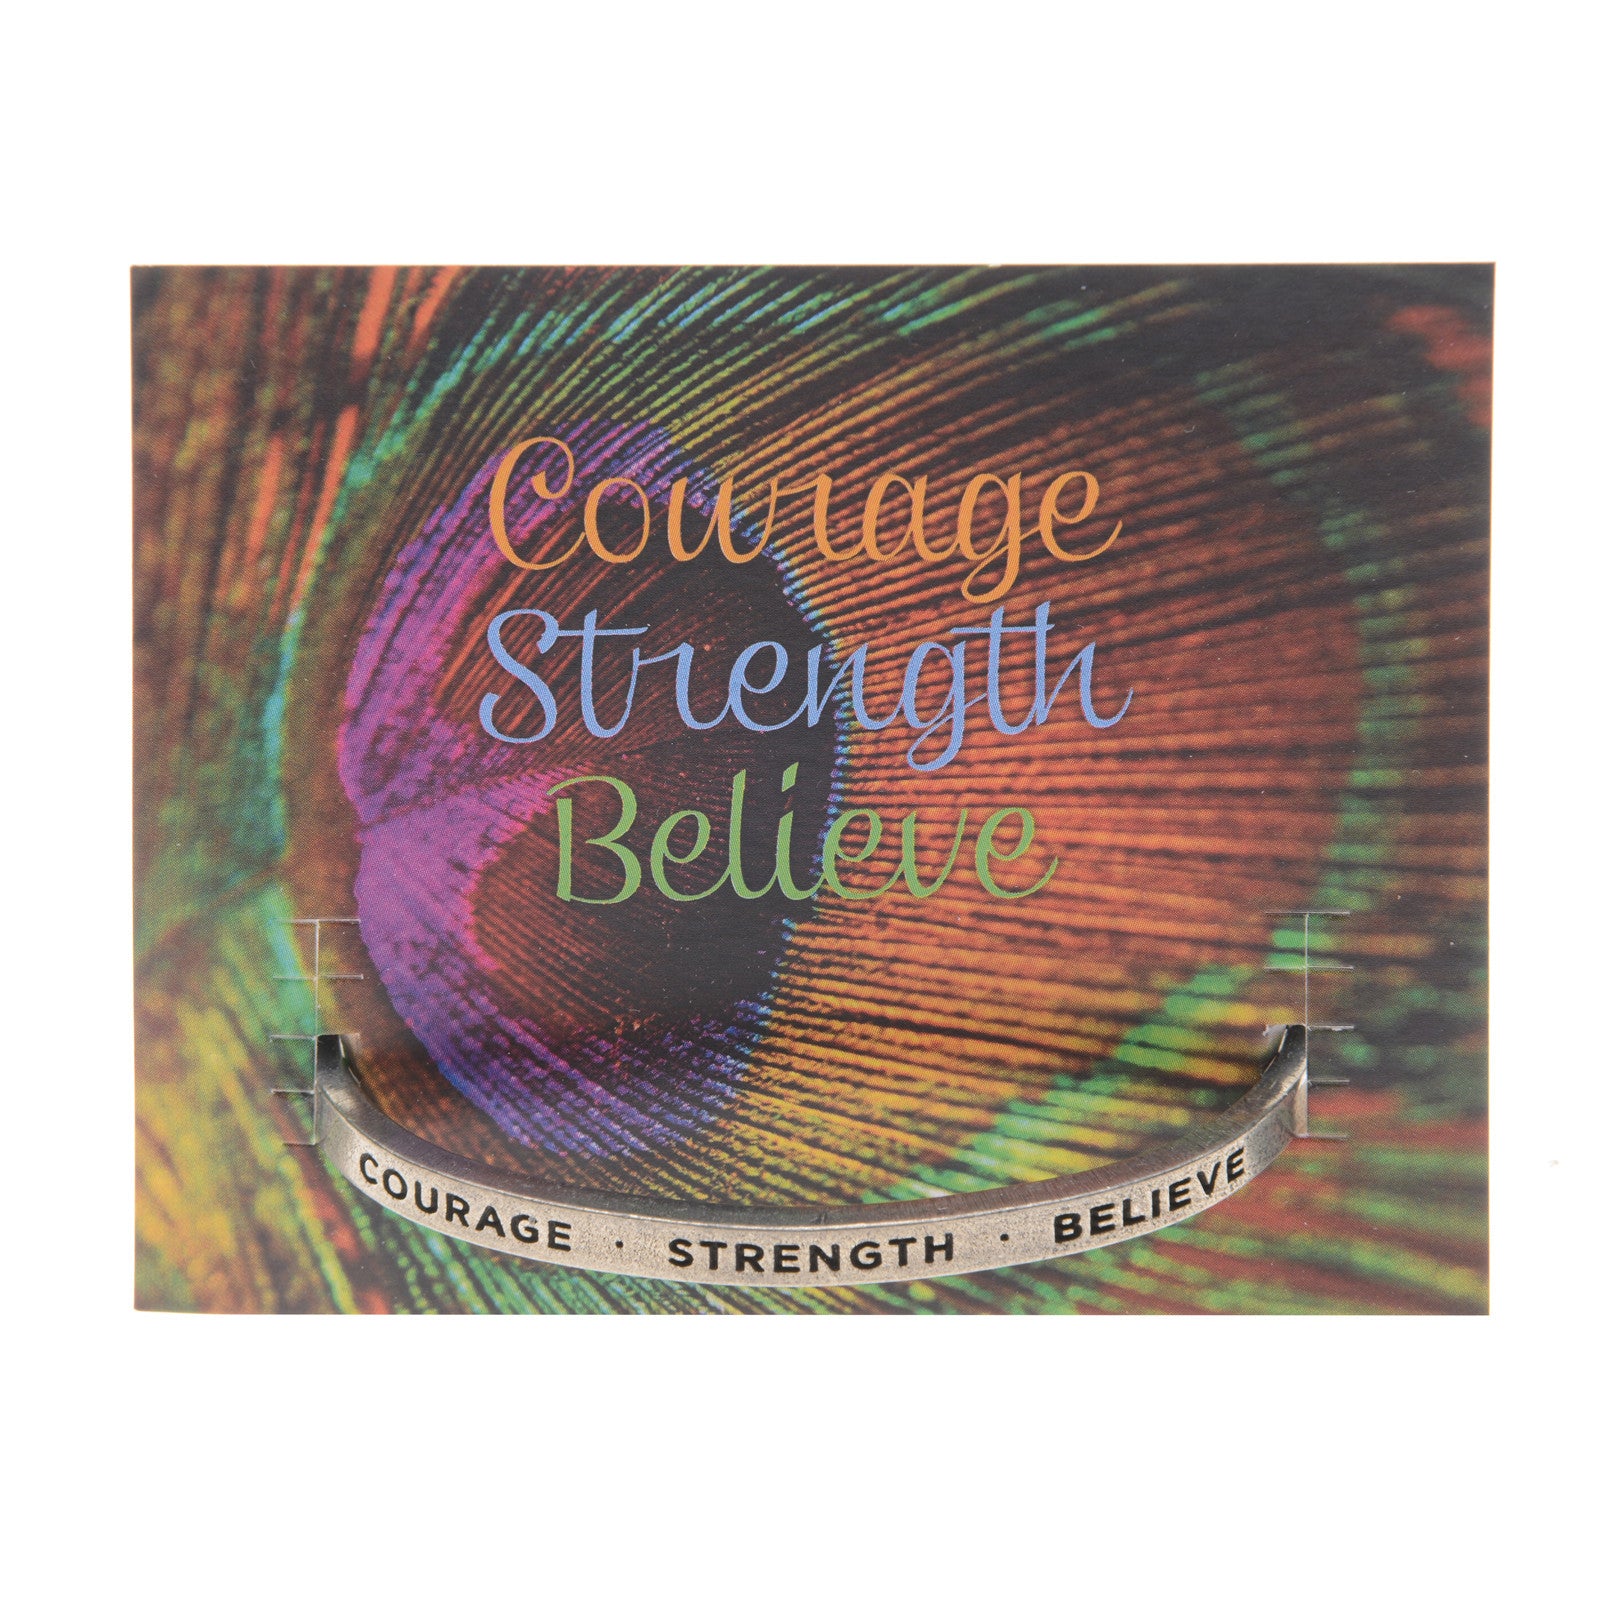 Courage-Strength-Believe Quotable Cuff Bracelet on backer card